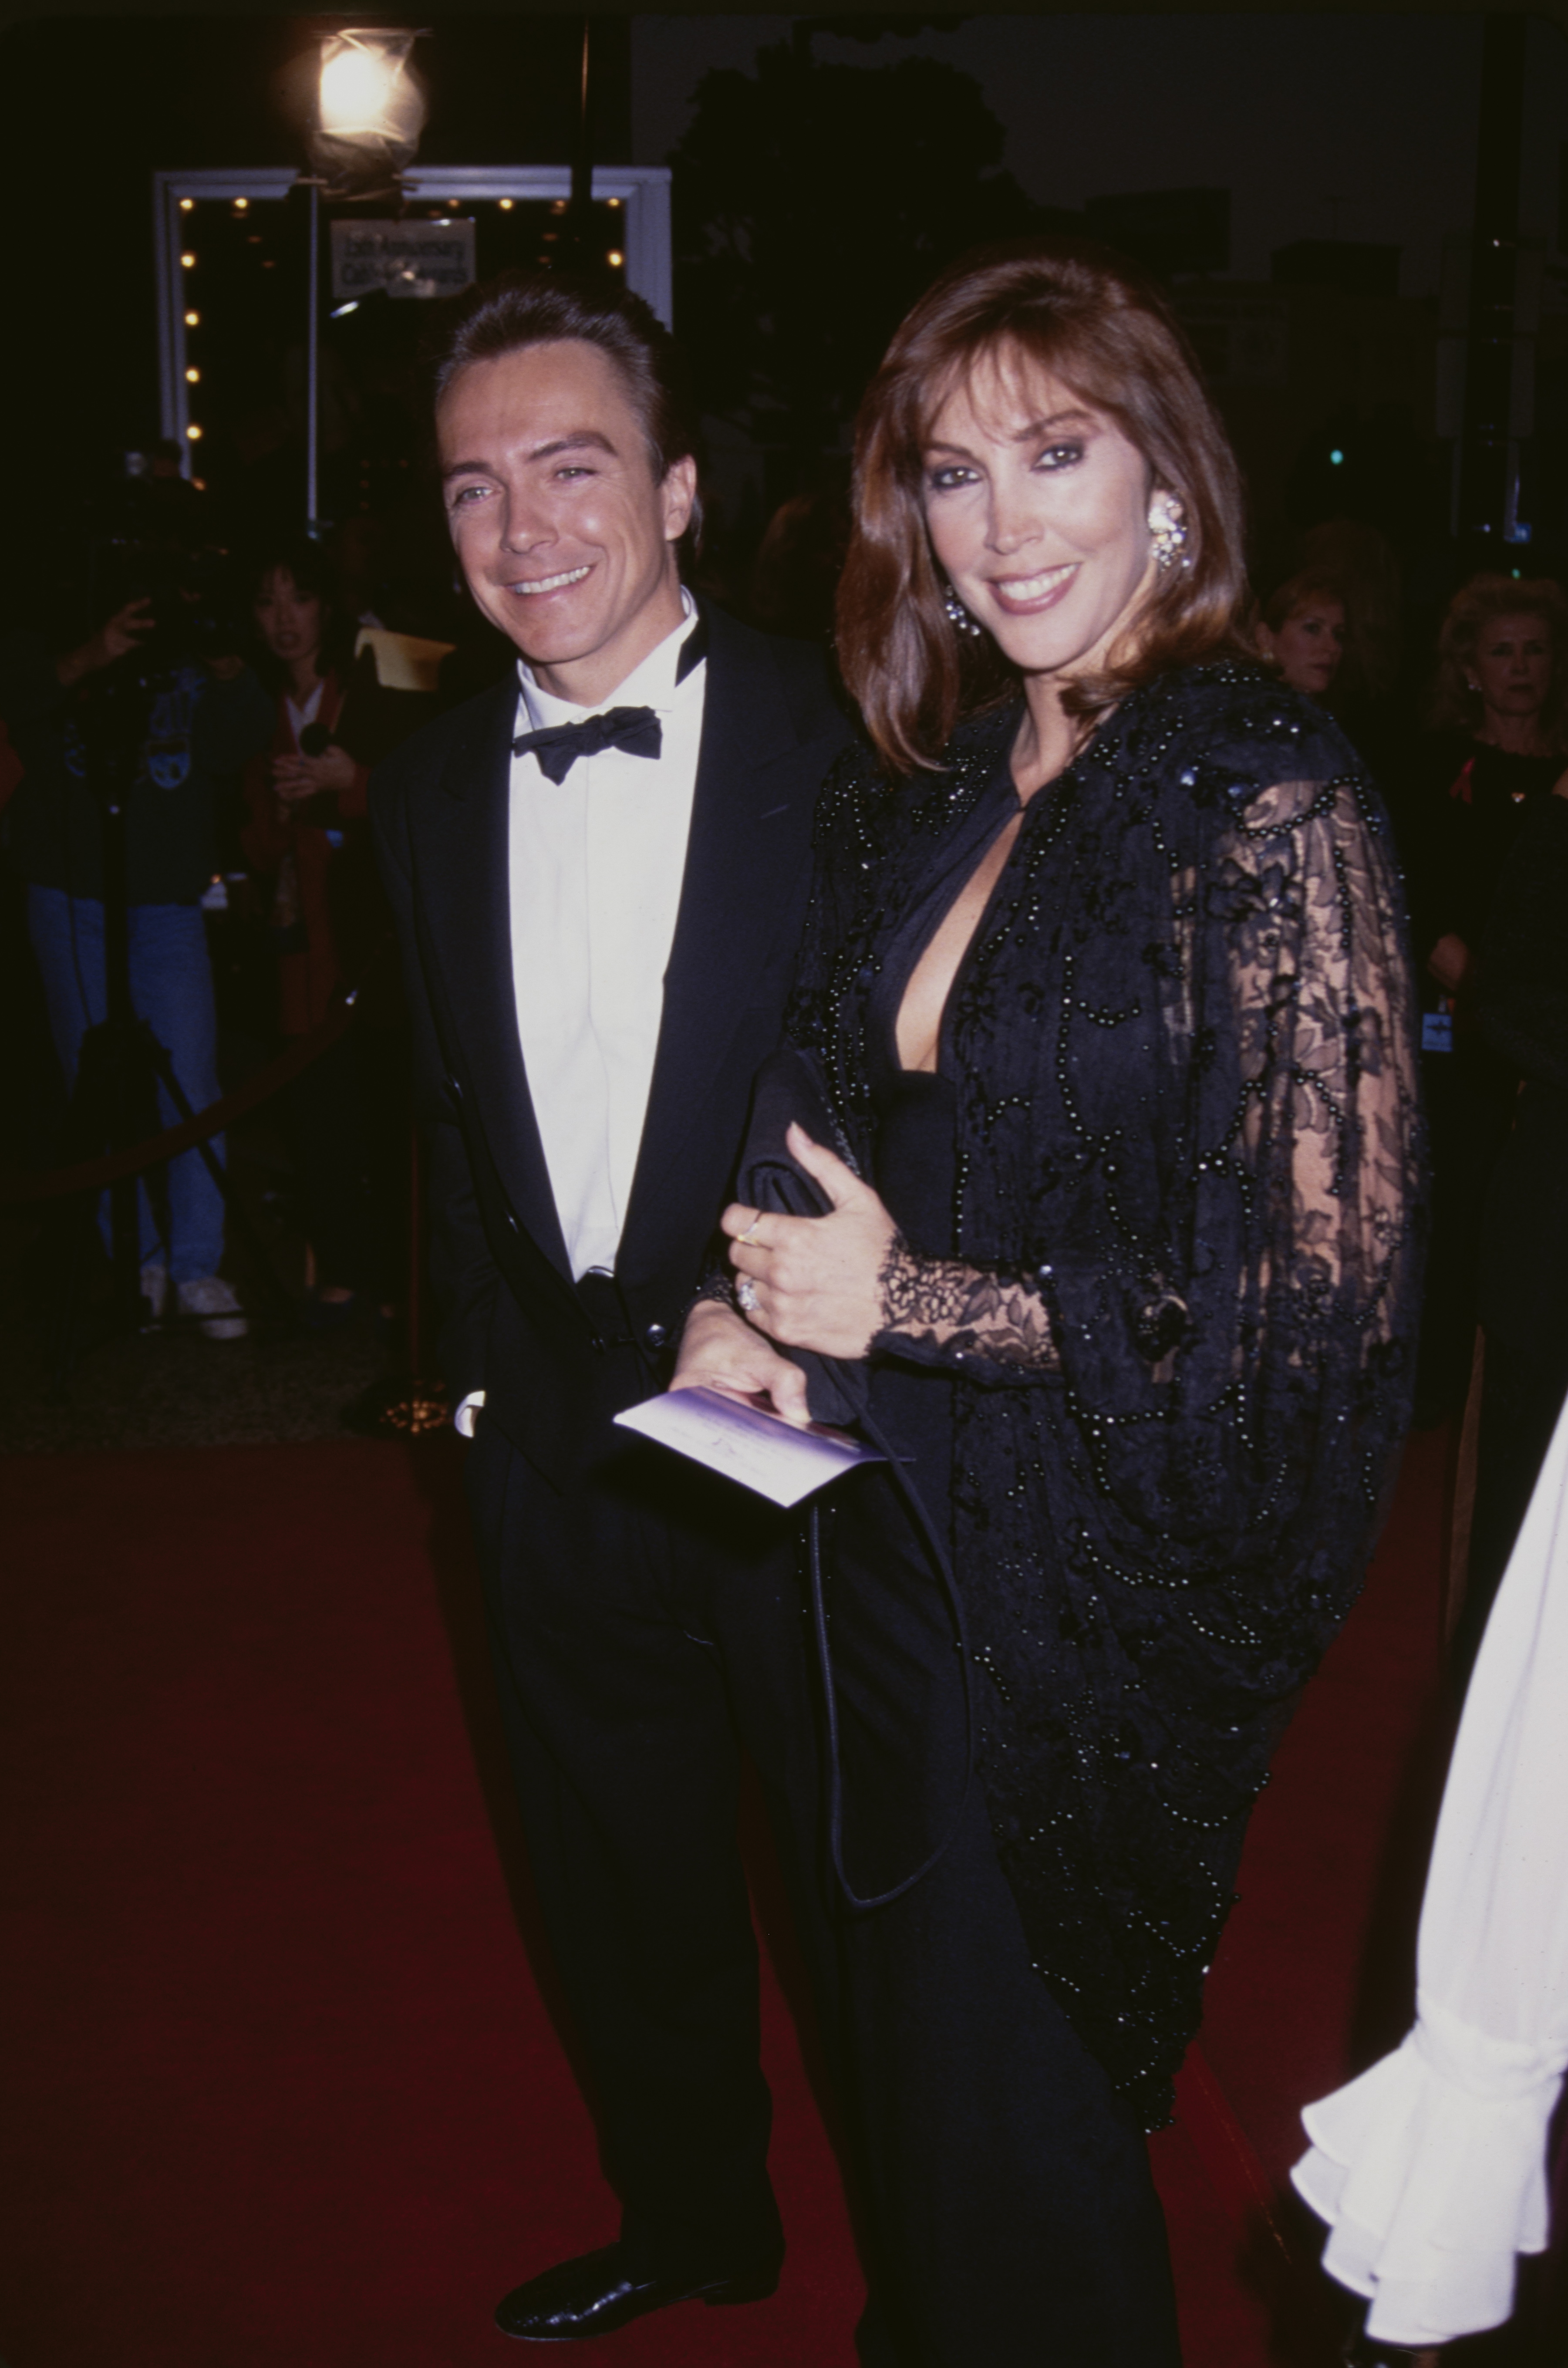 David Cassidy and Sue Shifrin during the Cable Ace Awards in Los Angeles, California, on January 15, 1994 | Source: Getty Images